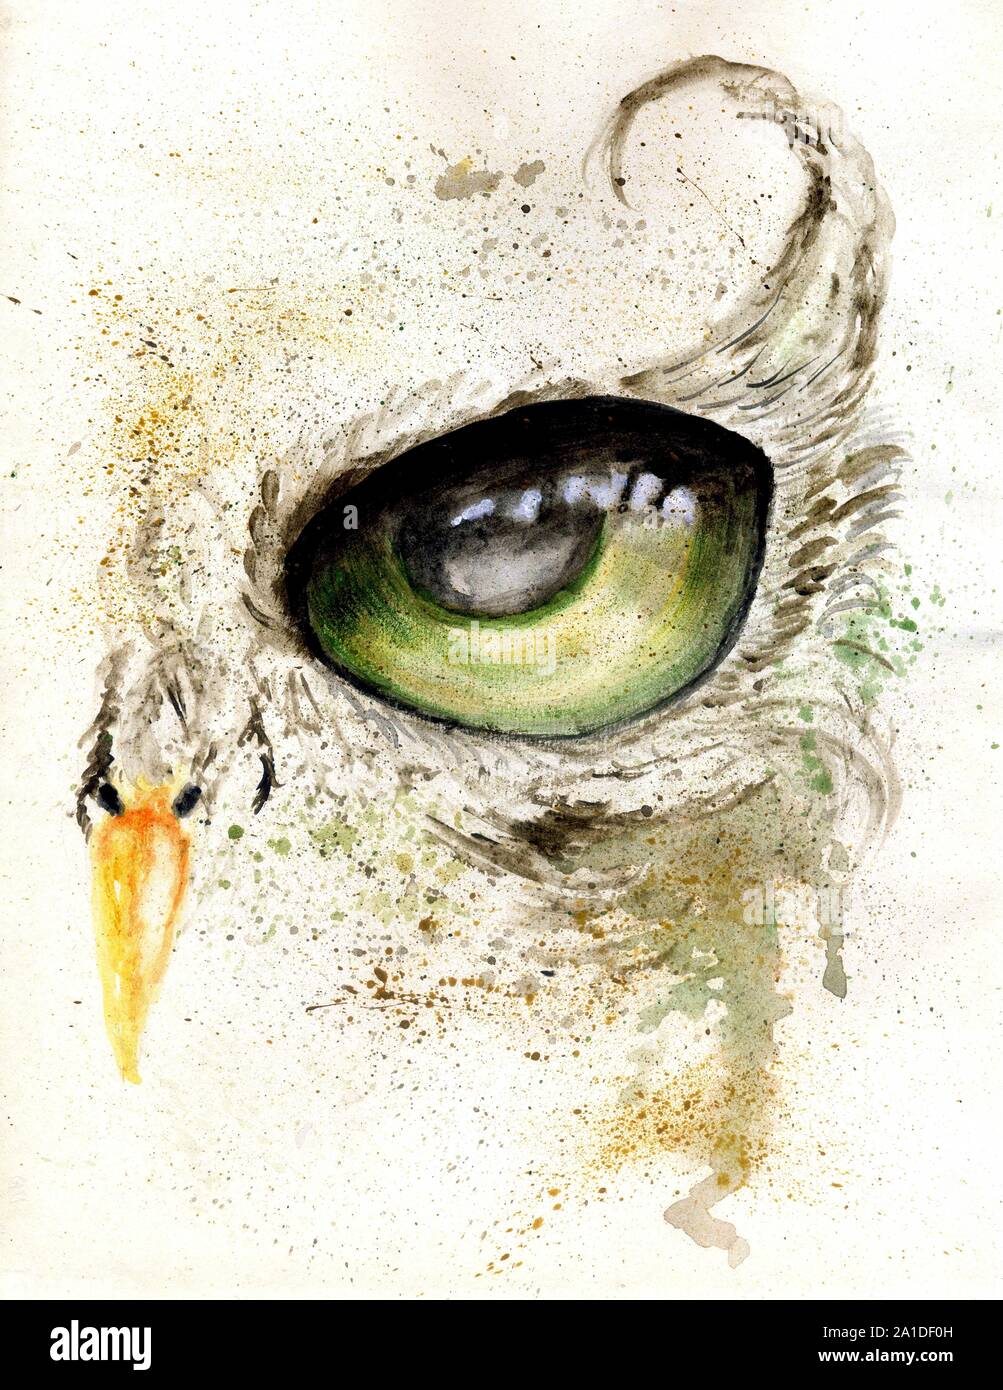 Fantasy owl eye painting with acrylic and watercolor Stock Photo - Alamy